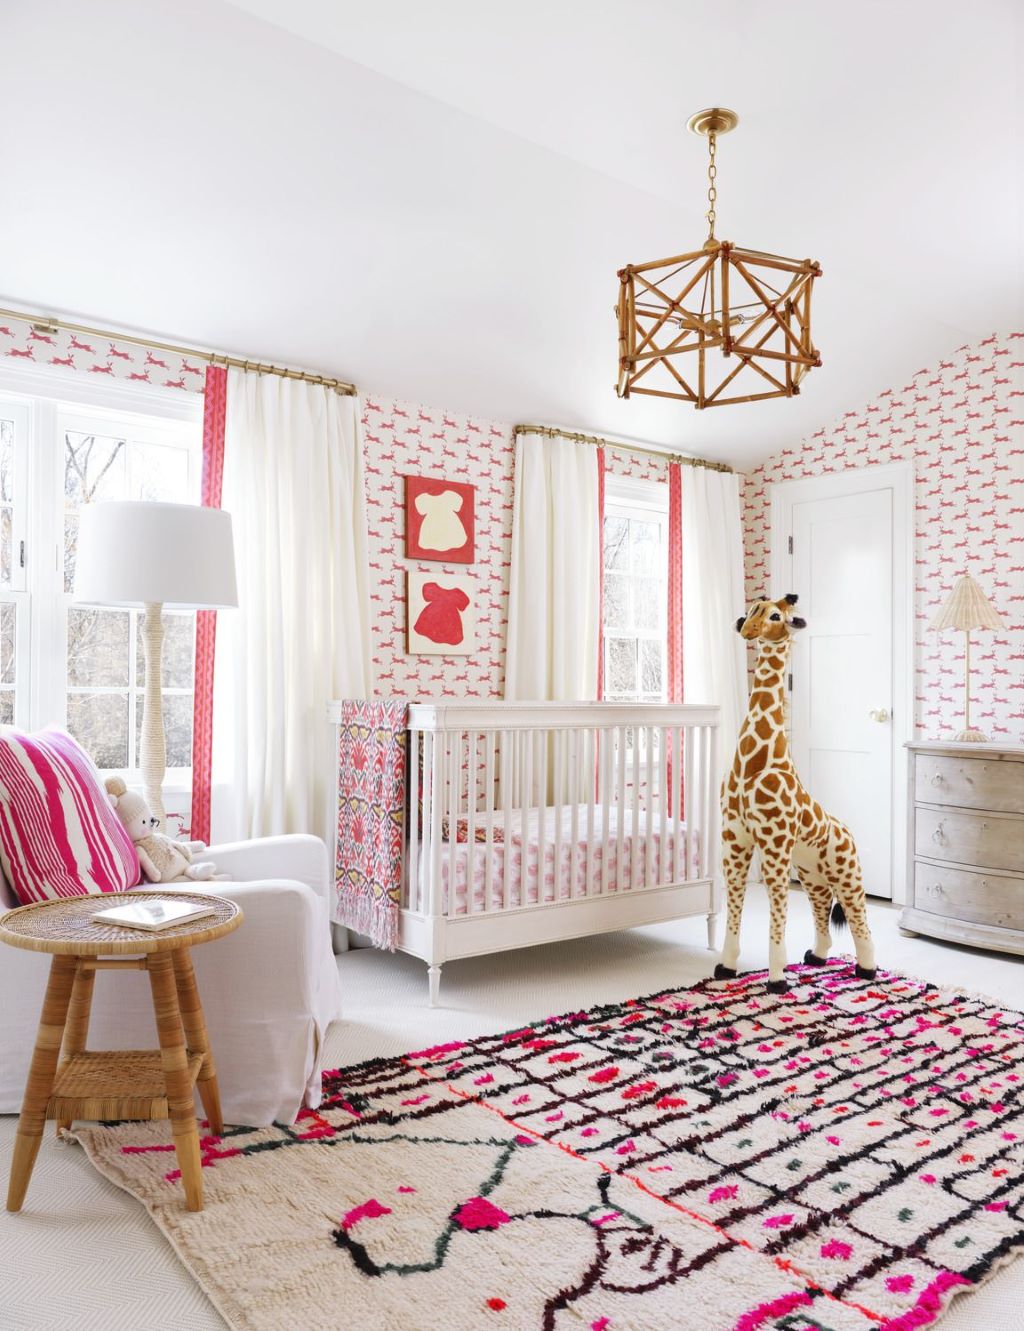 Create a Cozy and Chic Nursery: Tips and Tricks